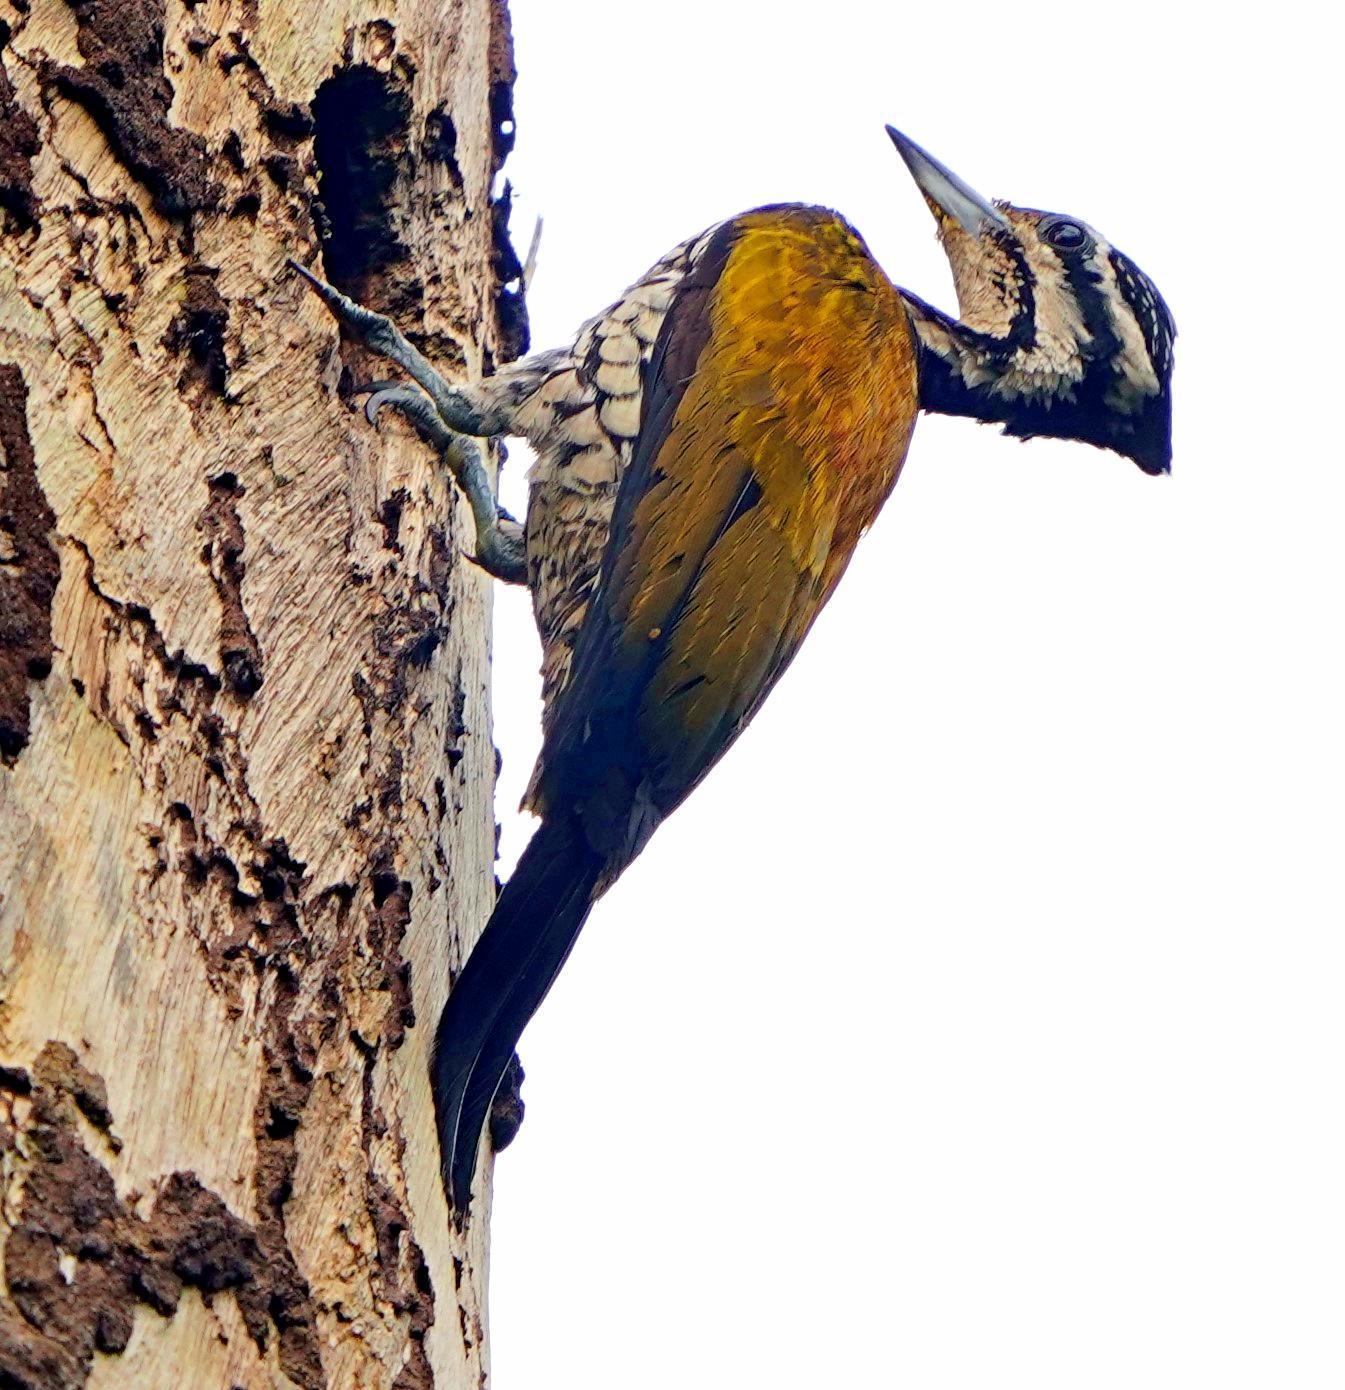 Common Flameback Photo by Steven Cheong